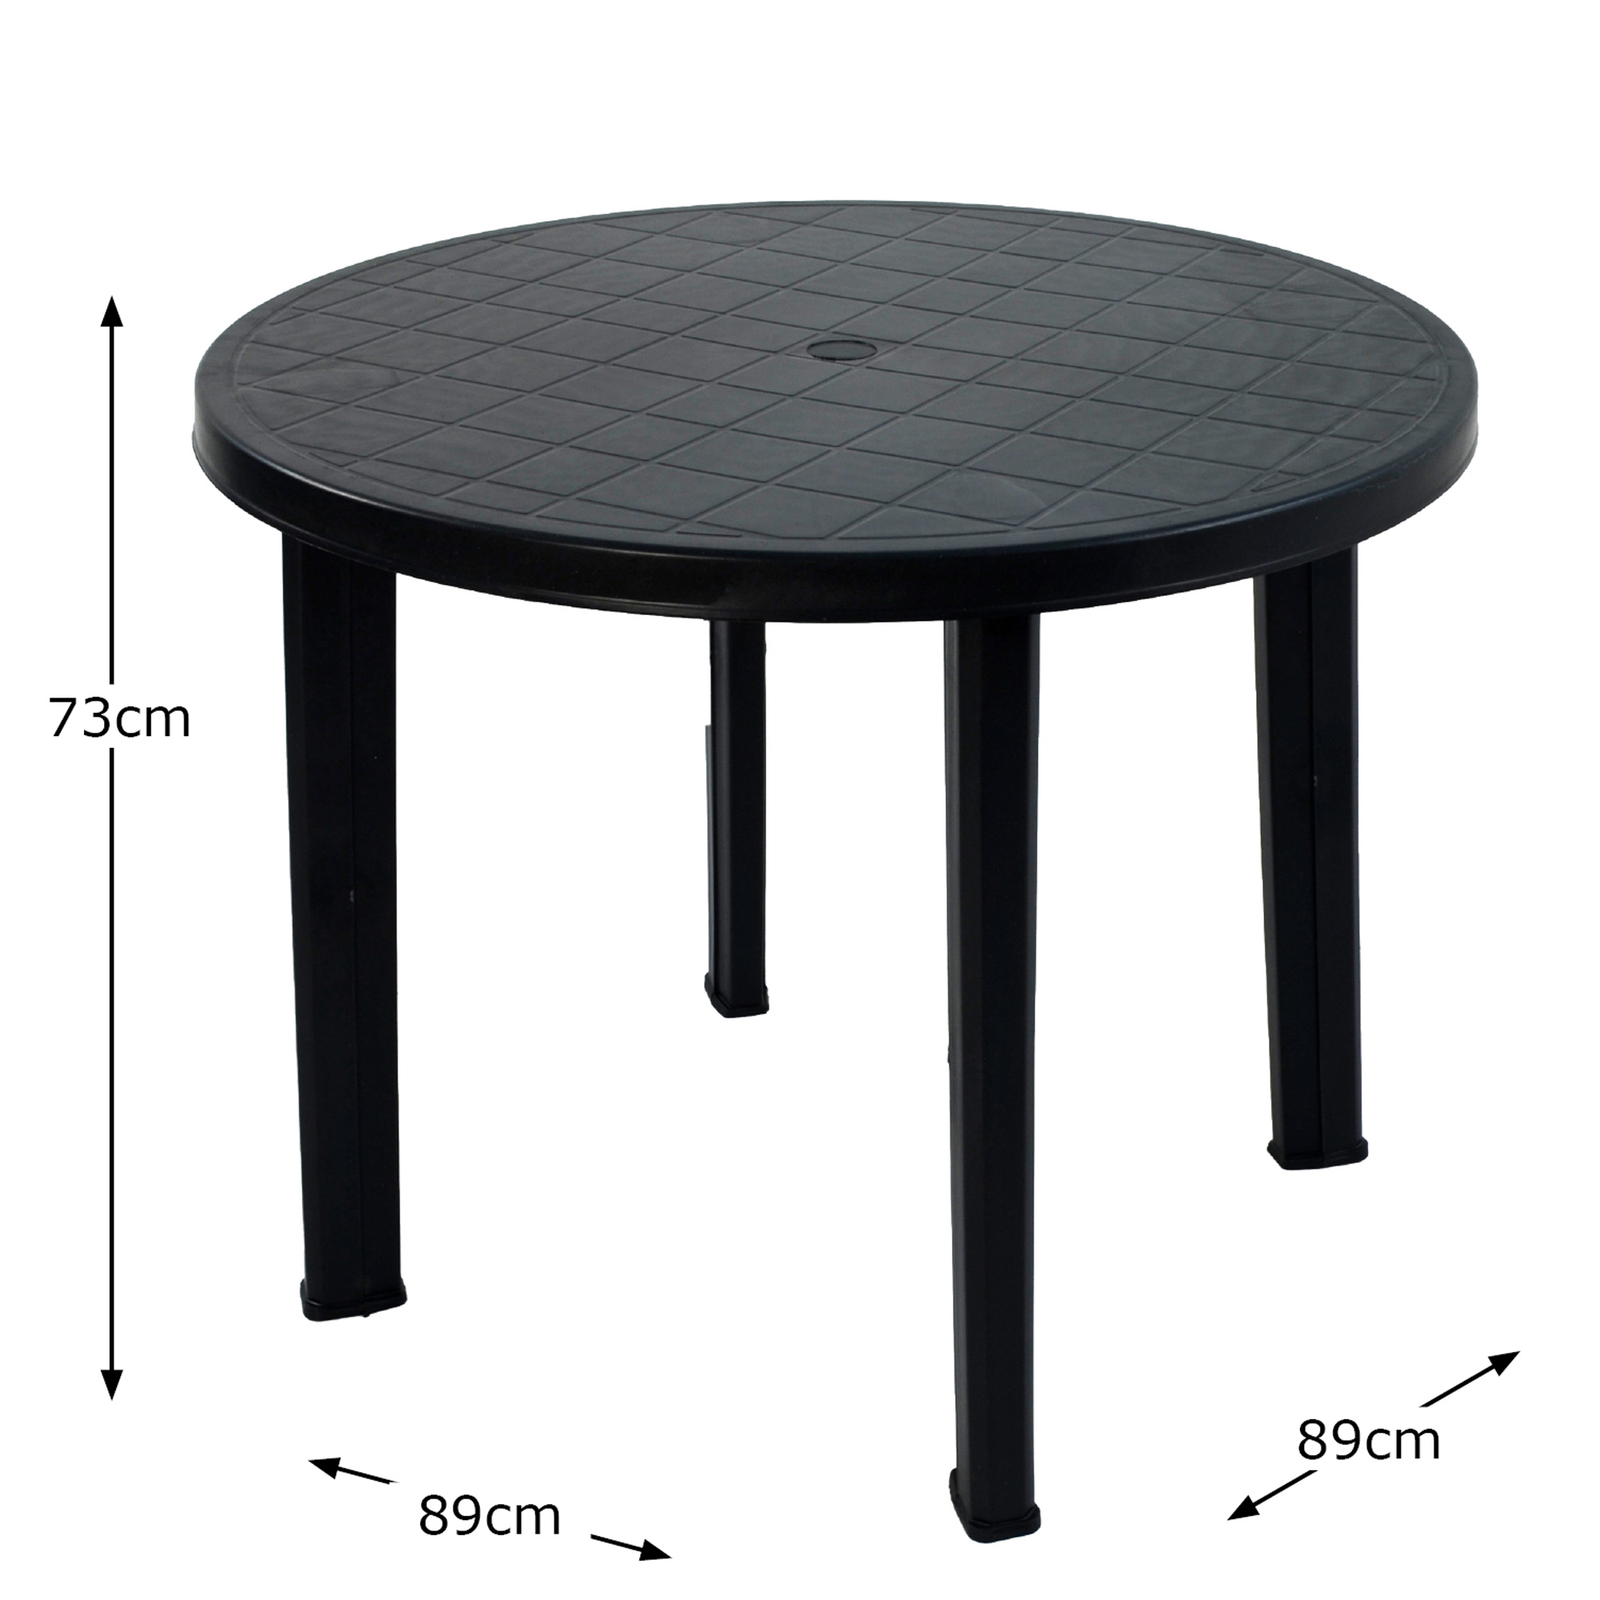 Trabella Revello Round Table Anthracite Grey Tables Trabella Default Title  